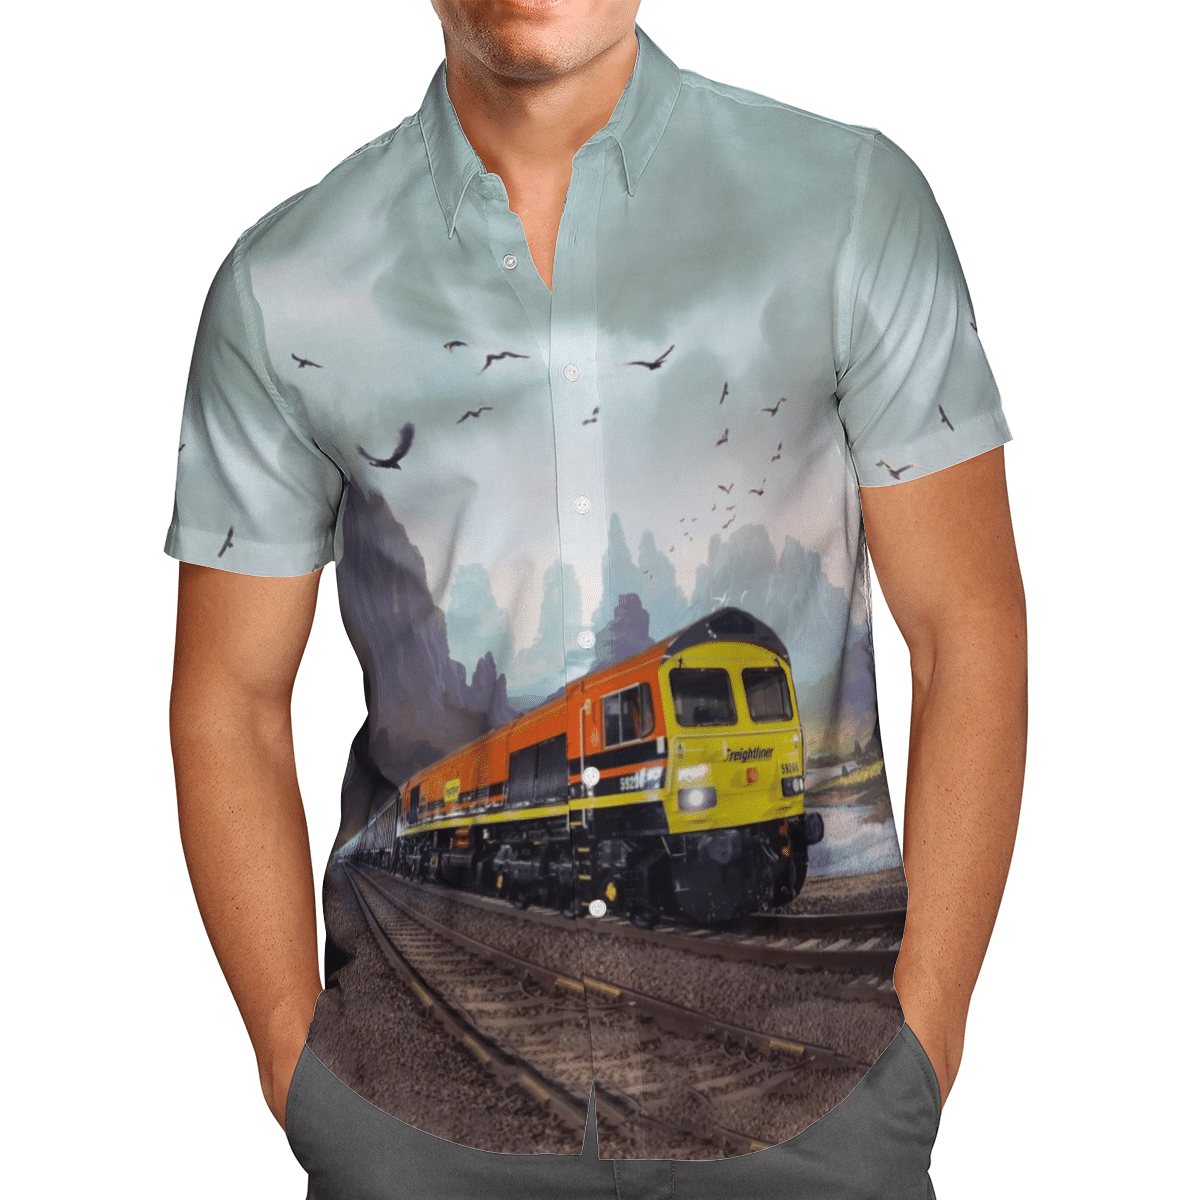 HOT Freightliner Class 59 Locomotive Train All Over Print Tropical Shirt1